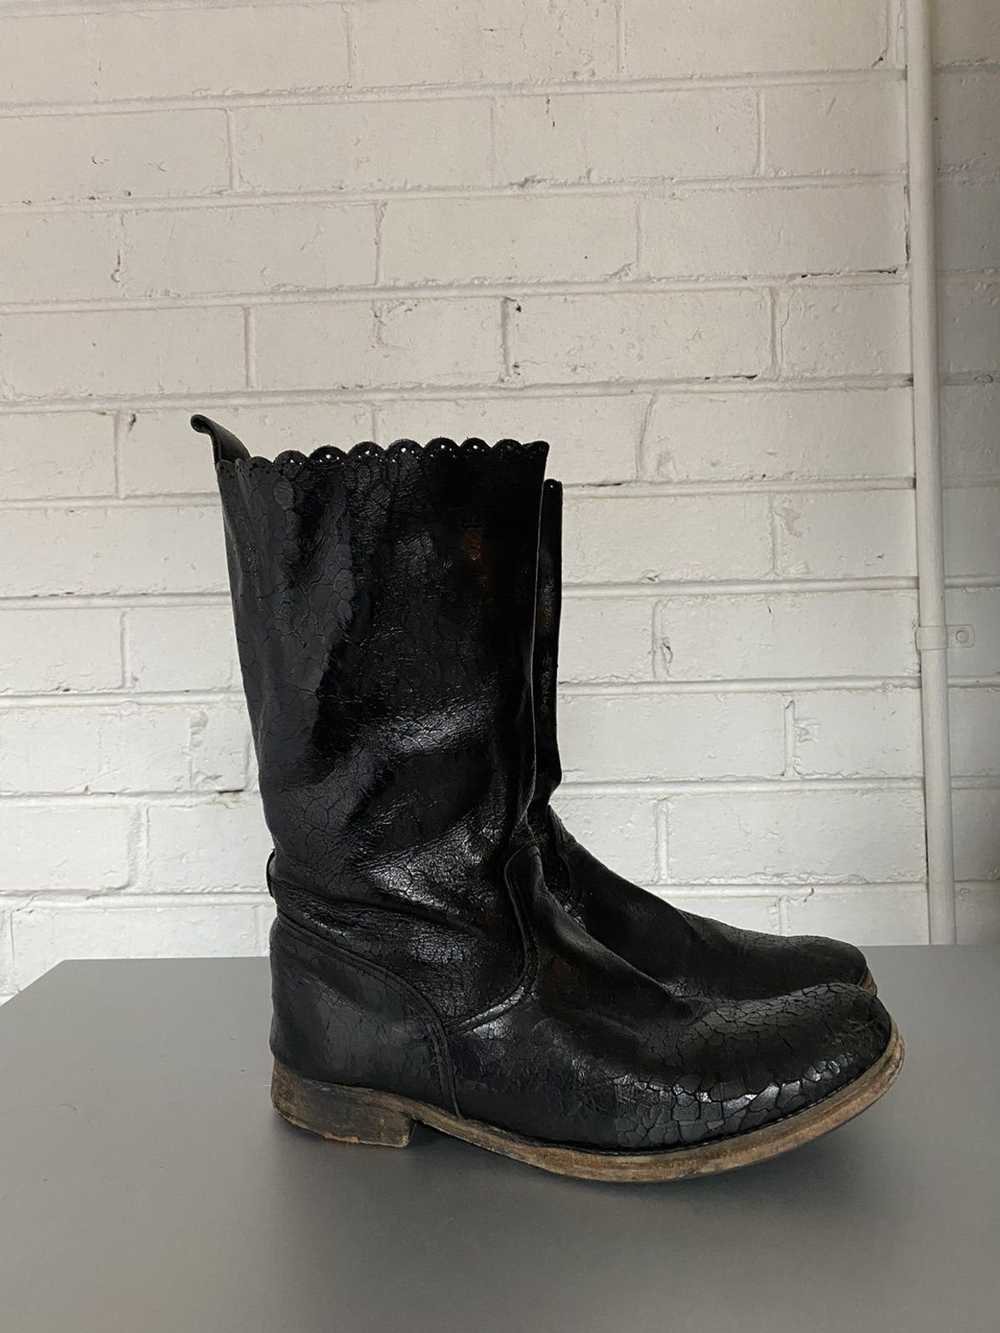 Undercover **Rare** Undercover Crackle Boots - image 2